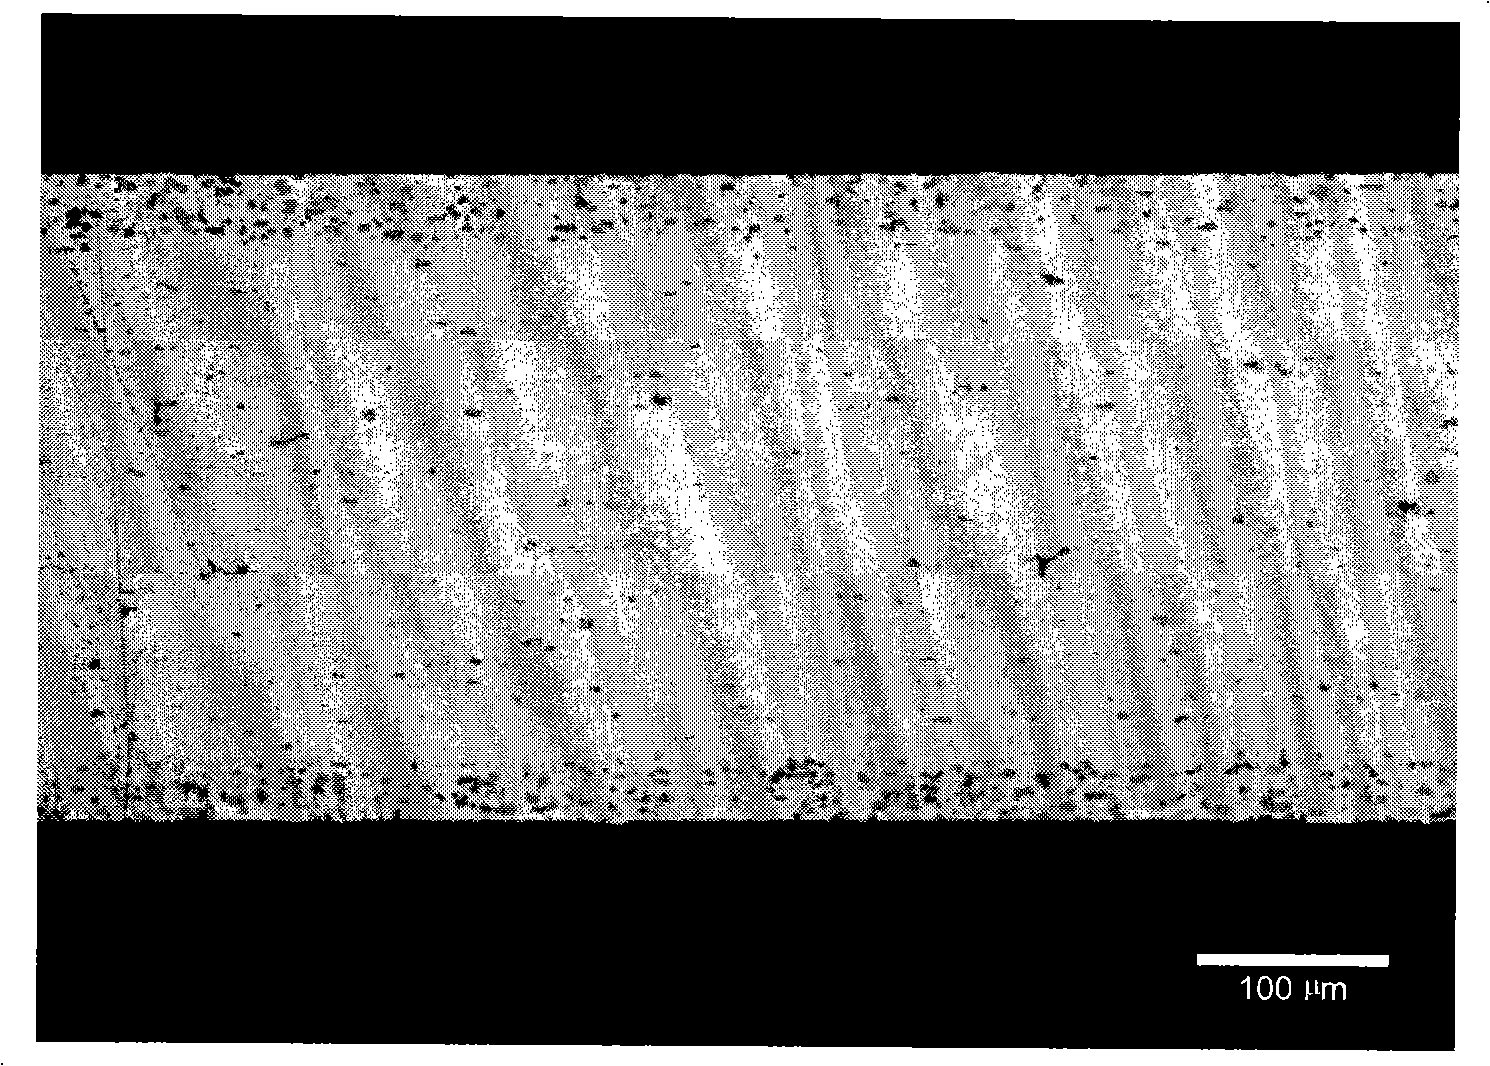 High performance aluminum alloy composite foil for heat converter and method of manufacture